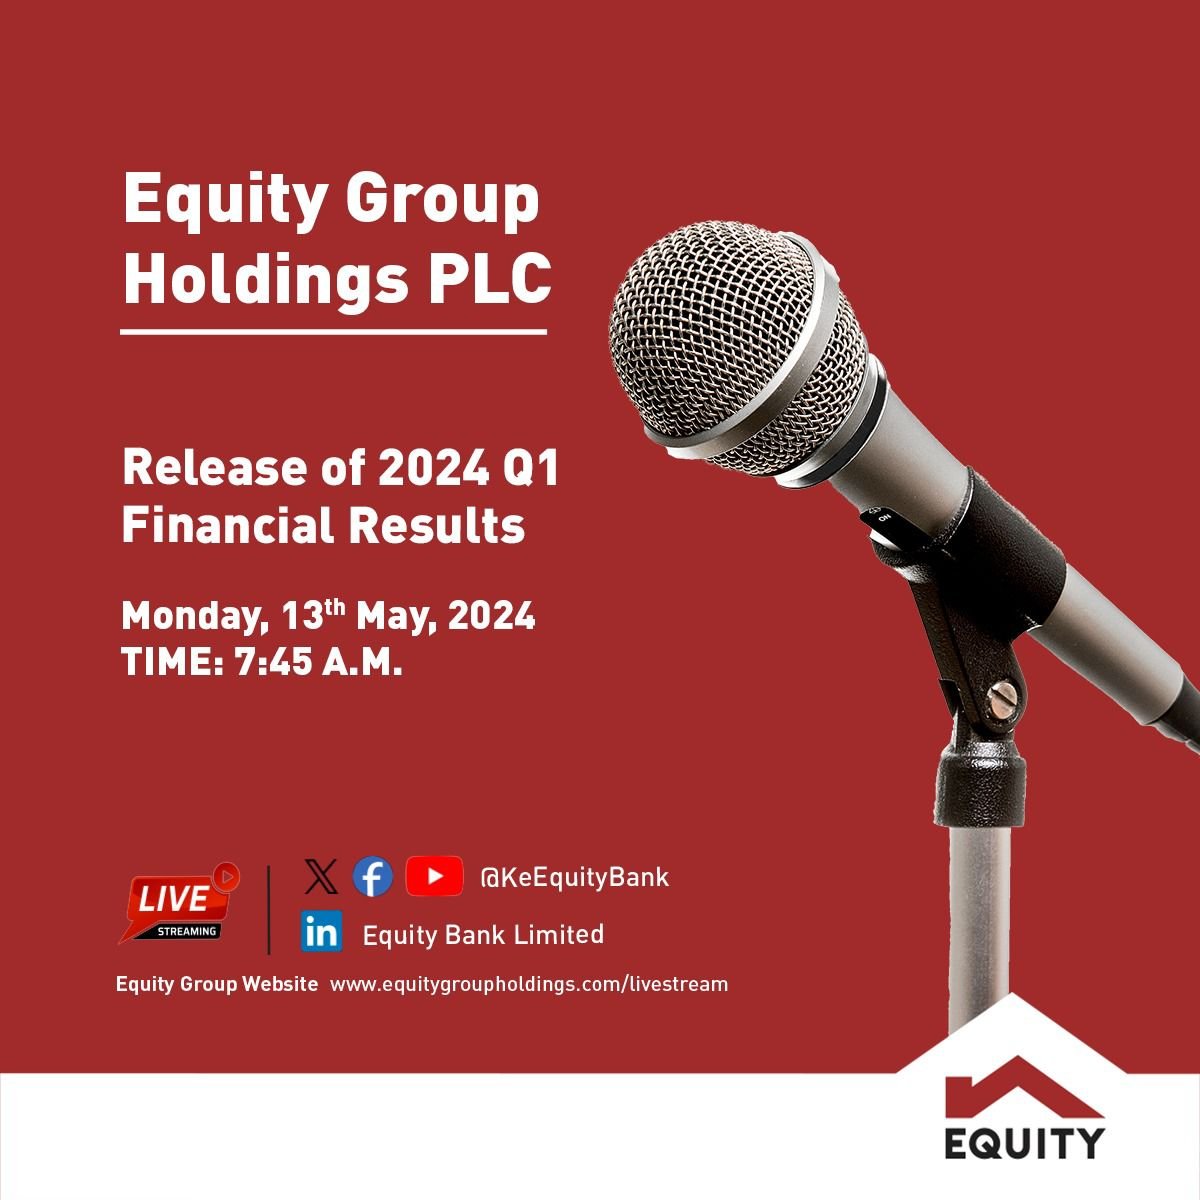 Earlier this week on 13th May 2024, Equity Group Holding PLC released their 2024 Q1 Financial Results. In the release, they highlighted the significant performance improvement from the previous year ending 31st December. #Equity2024Q1Results